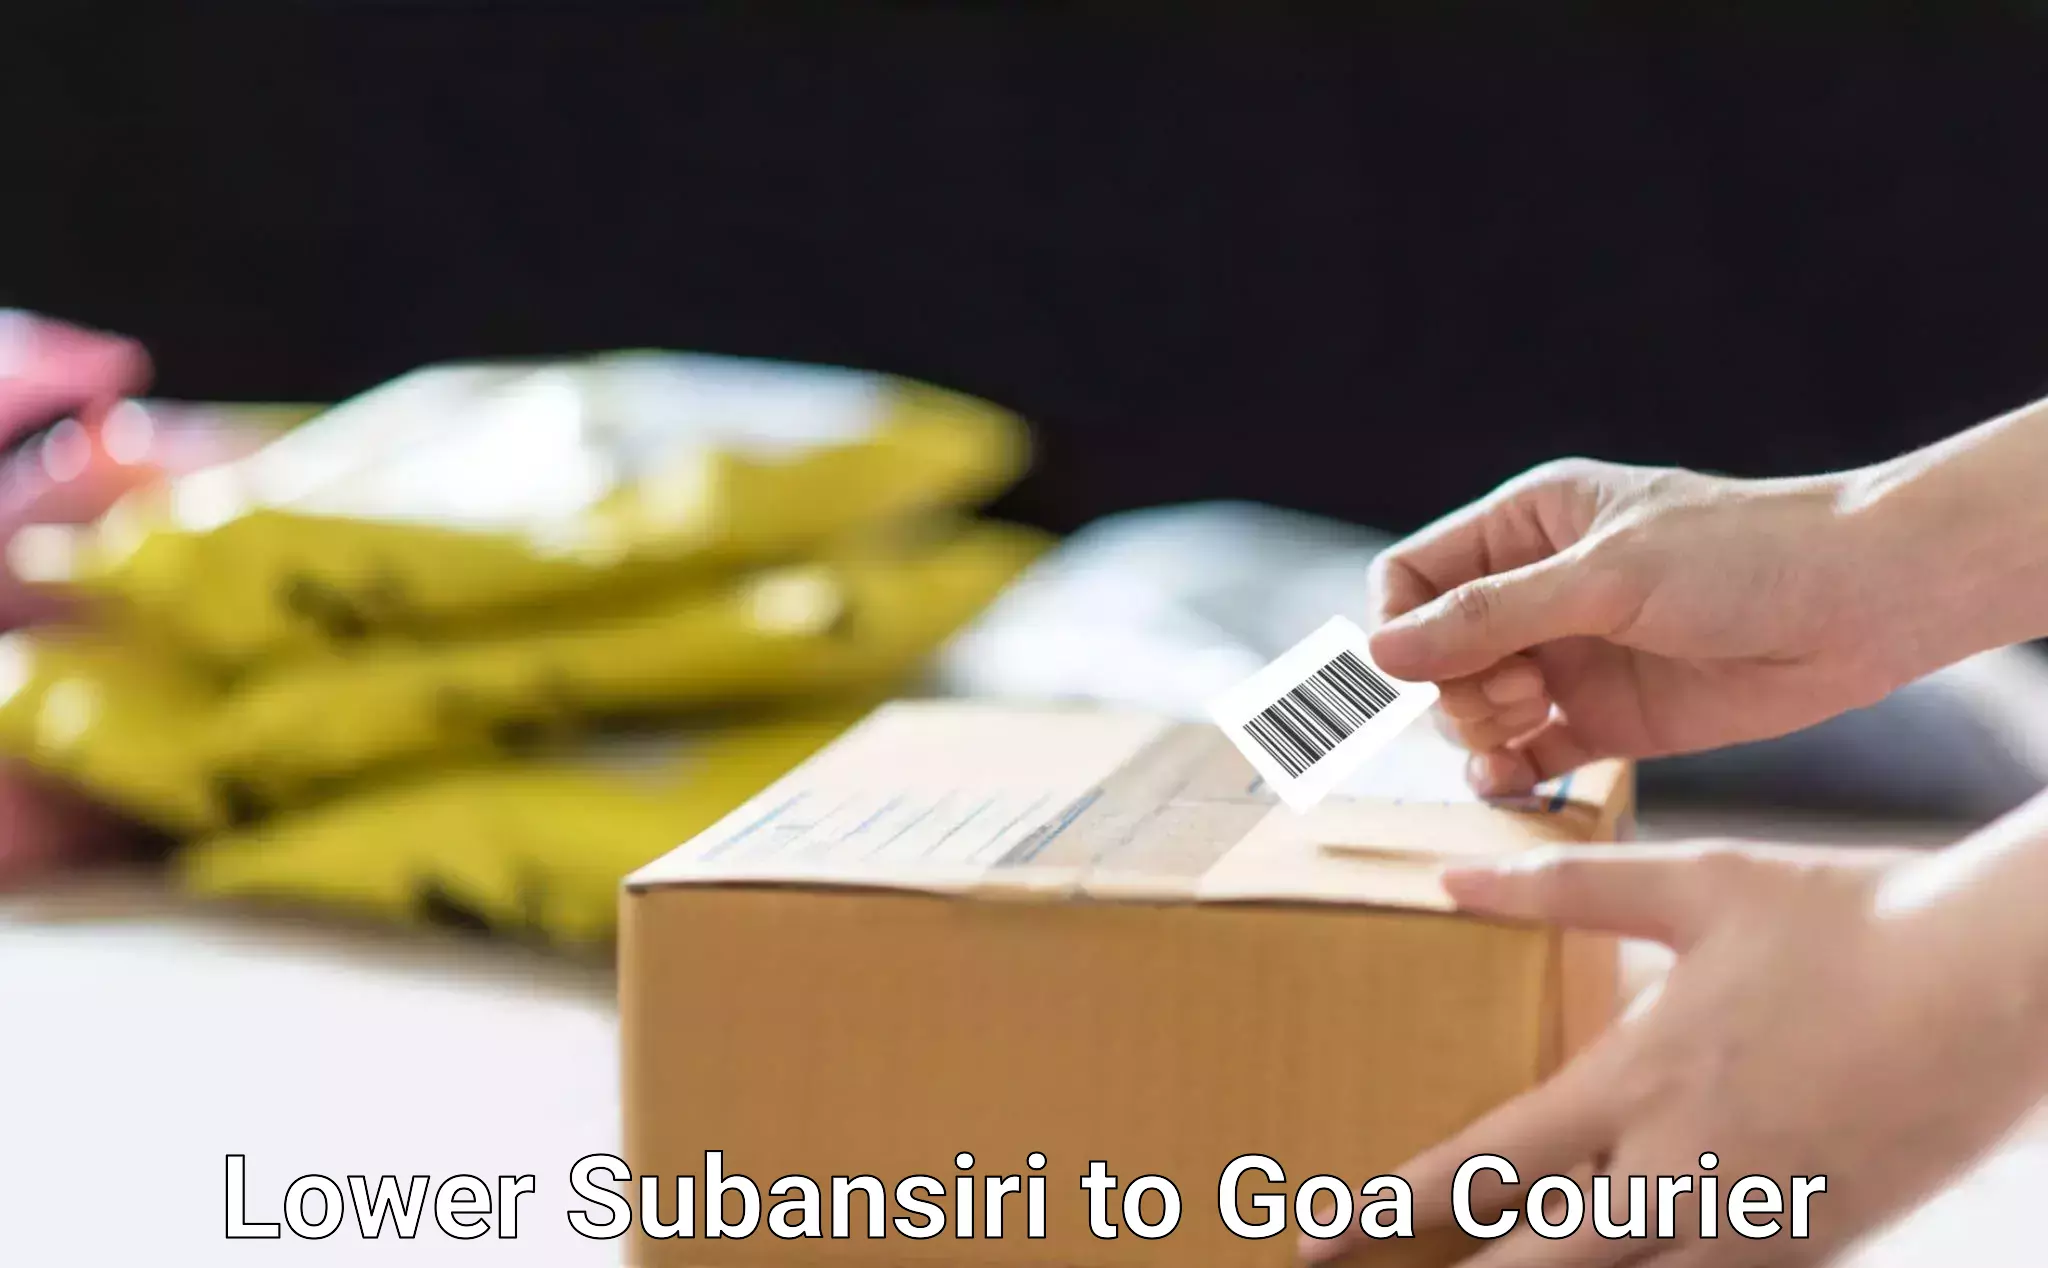 Flexible delivery scheduling in Lower Subansiri to Goa